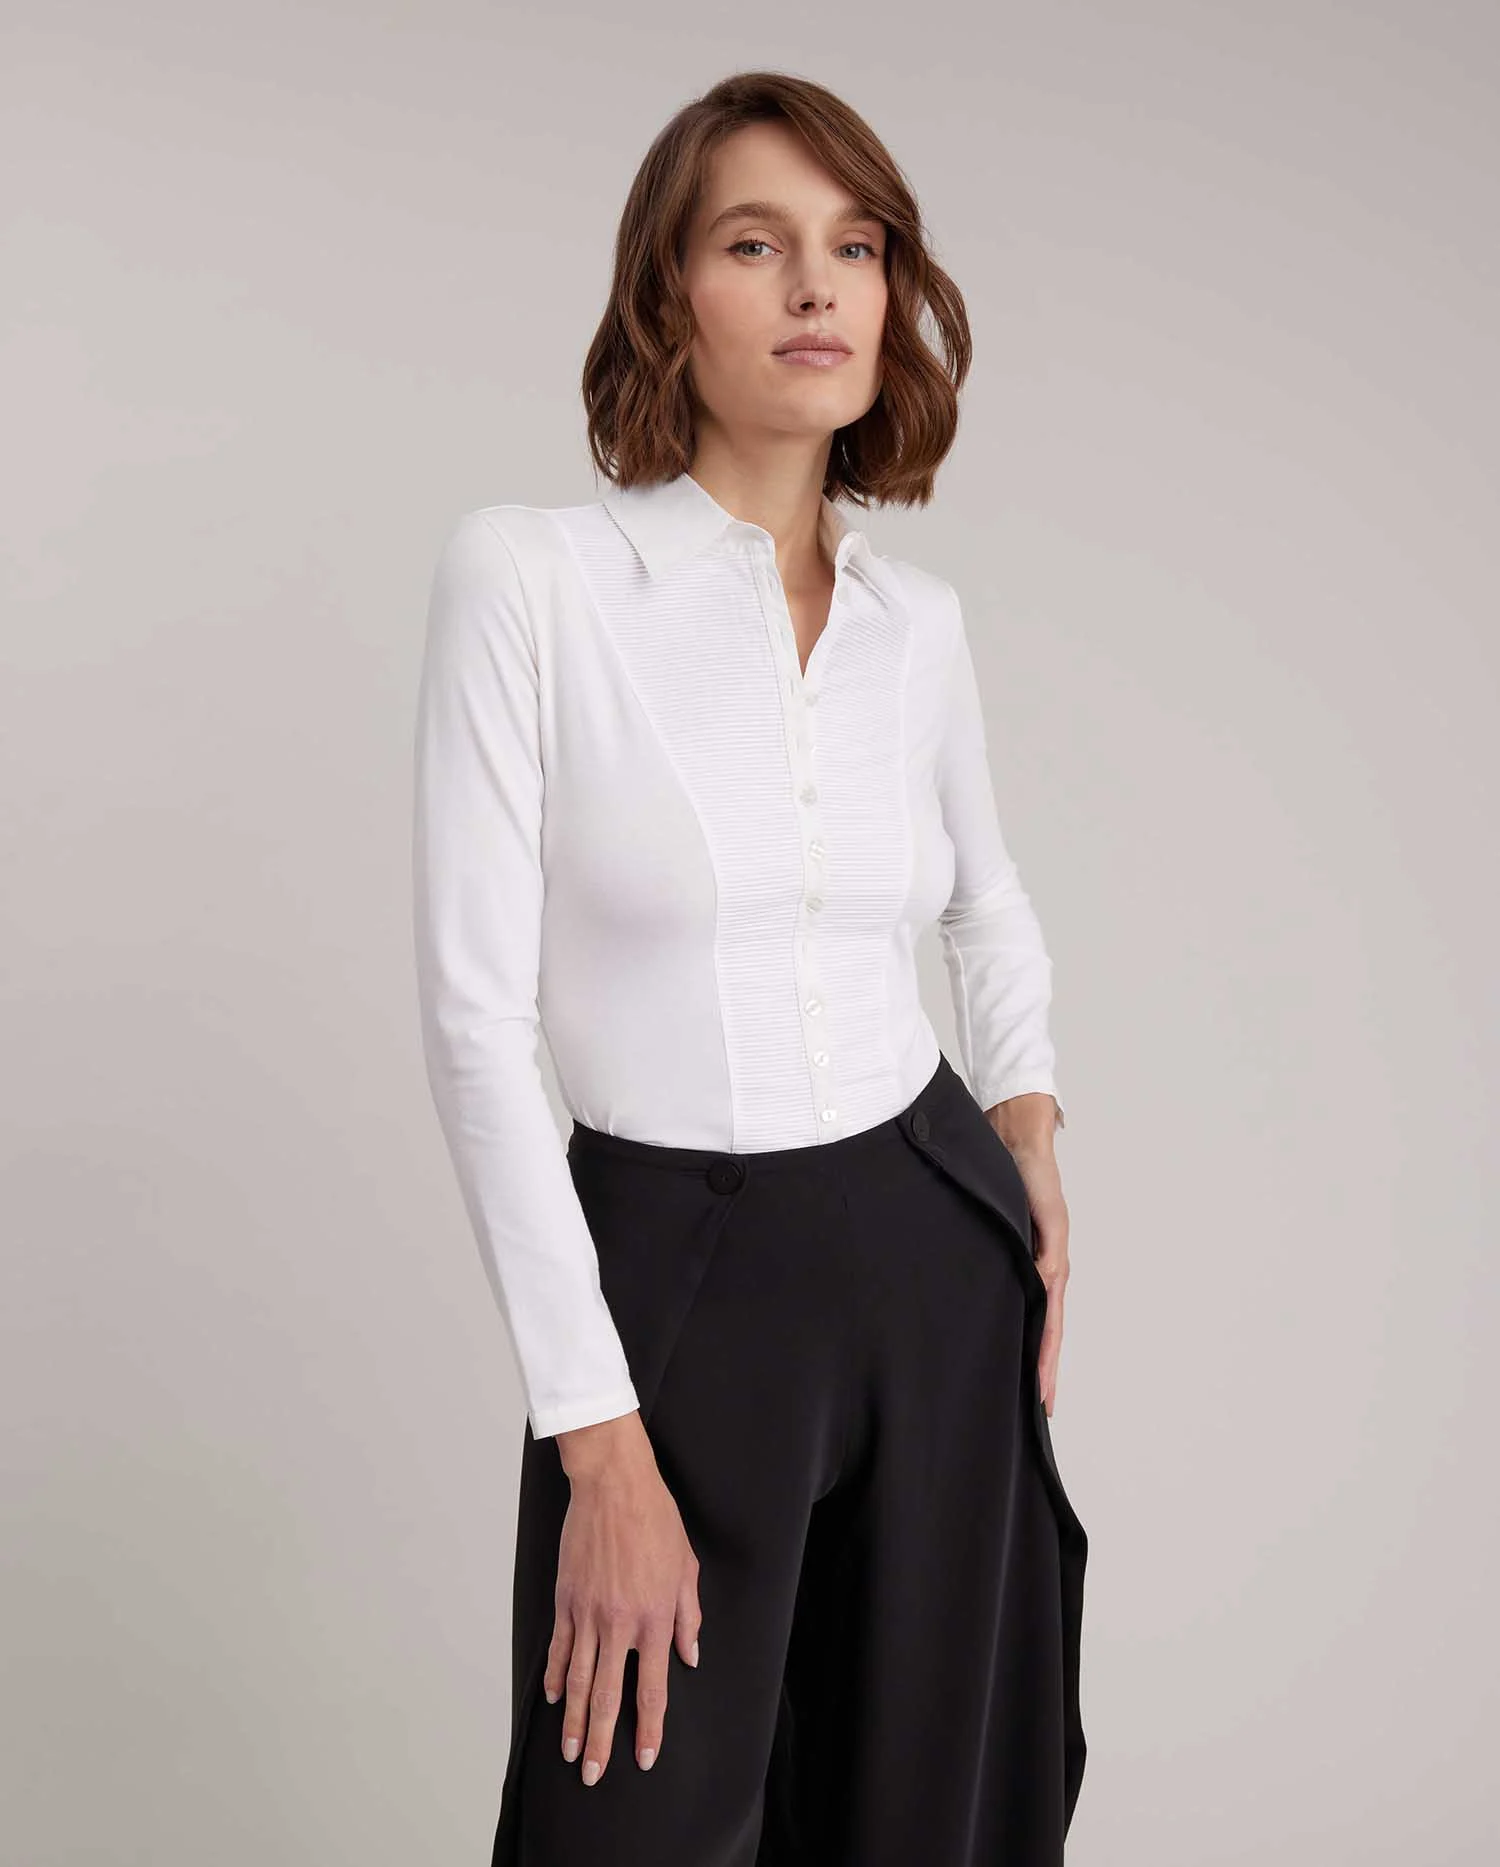 15 Best White Shirts For Women: Timeless Style (Guide)  White shirts women,  Women shirt design, Classy blouses